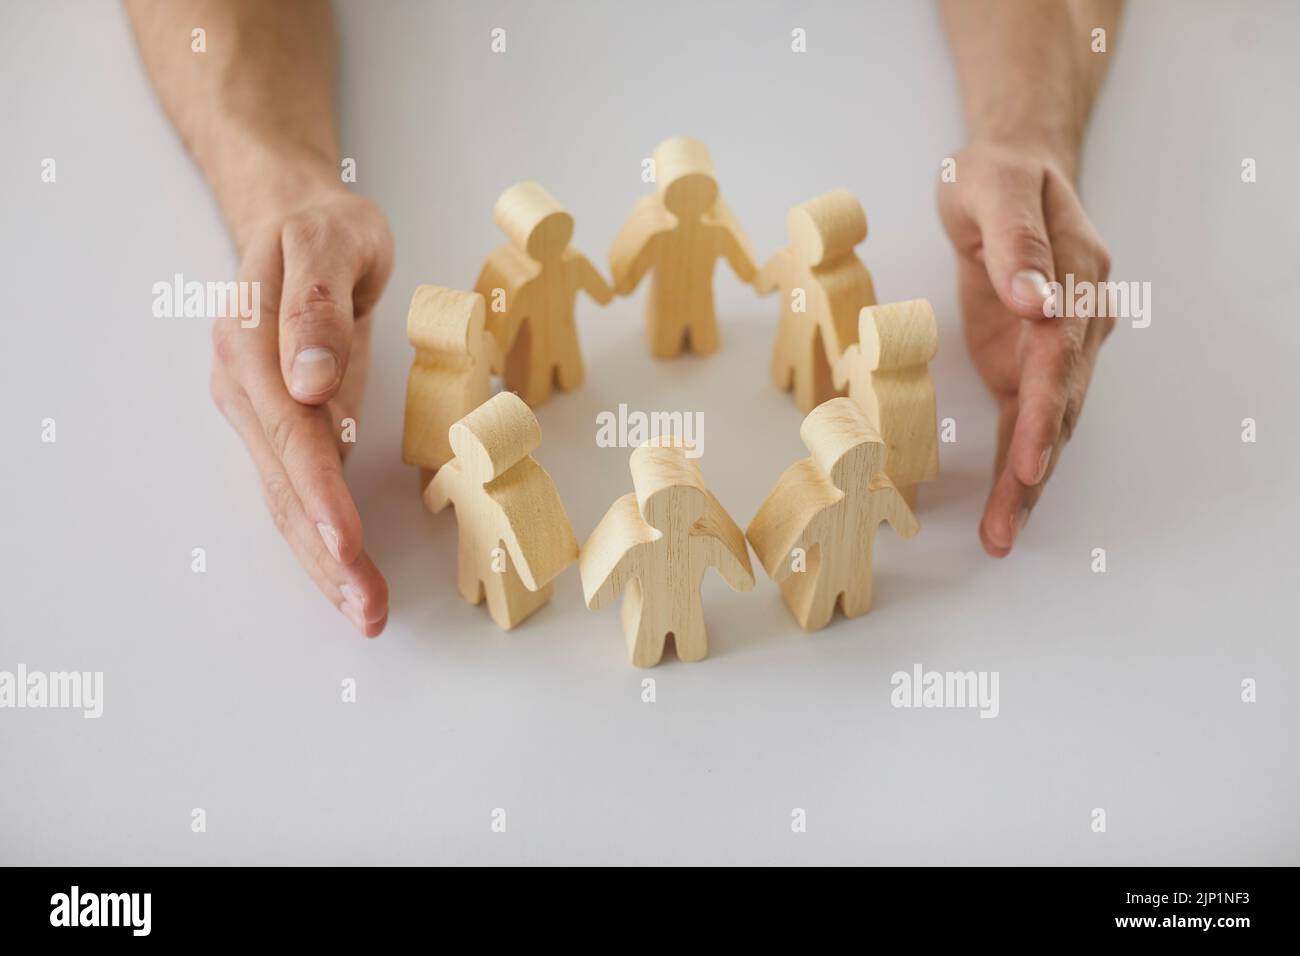 Hands protecting human figures as metaphor for creating safe community of people Stock Photo